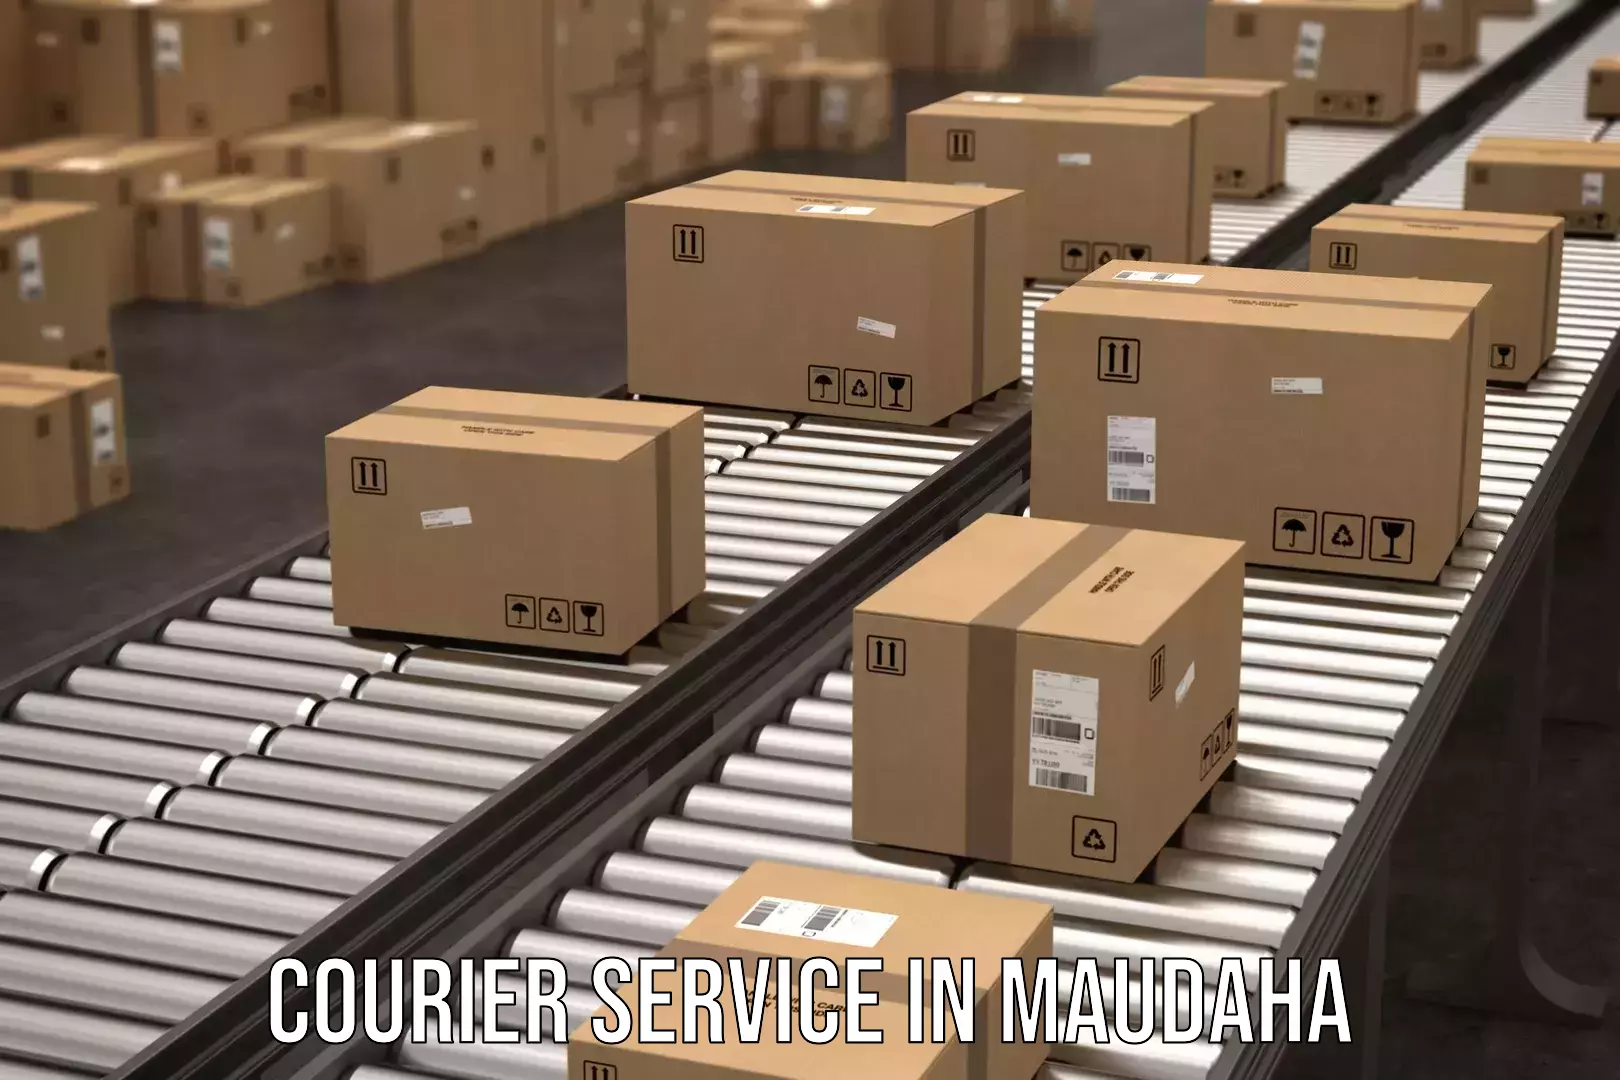 Online courier booking in Maudaha